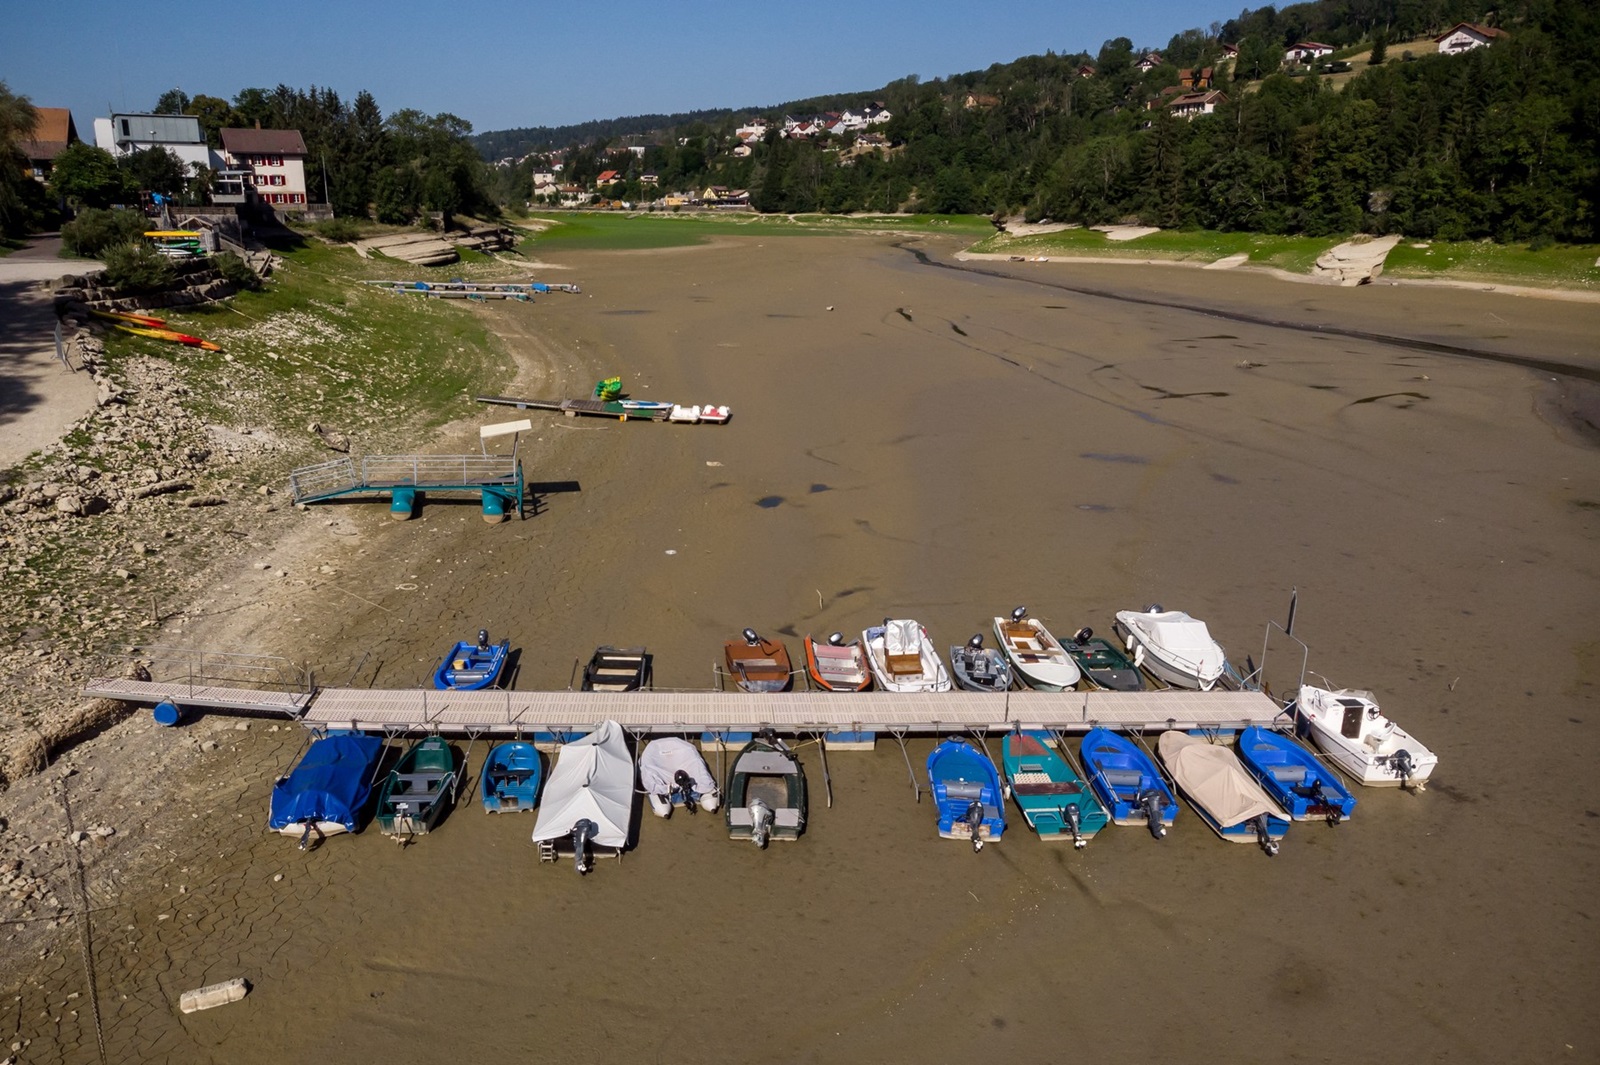 An aerial view shows boats in the dry bed of Brenets Lake (Lac des Brenets), part of the Doubs River, a natural border between eastern France and western Switzerland, in Les Brenets on July 18, 2022. The river has dried up due to  a combination of factors, including geological faults that drain the river, decreased rainfall and heat waves.,Image: 708040992, License: Rights-managed, Restrictions: , Model Release: no, Credit line: Fabrice COFFRINI / AFP / Profimedia